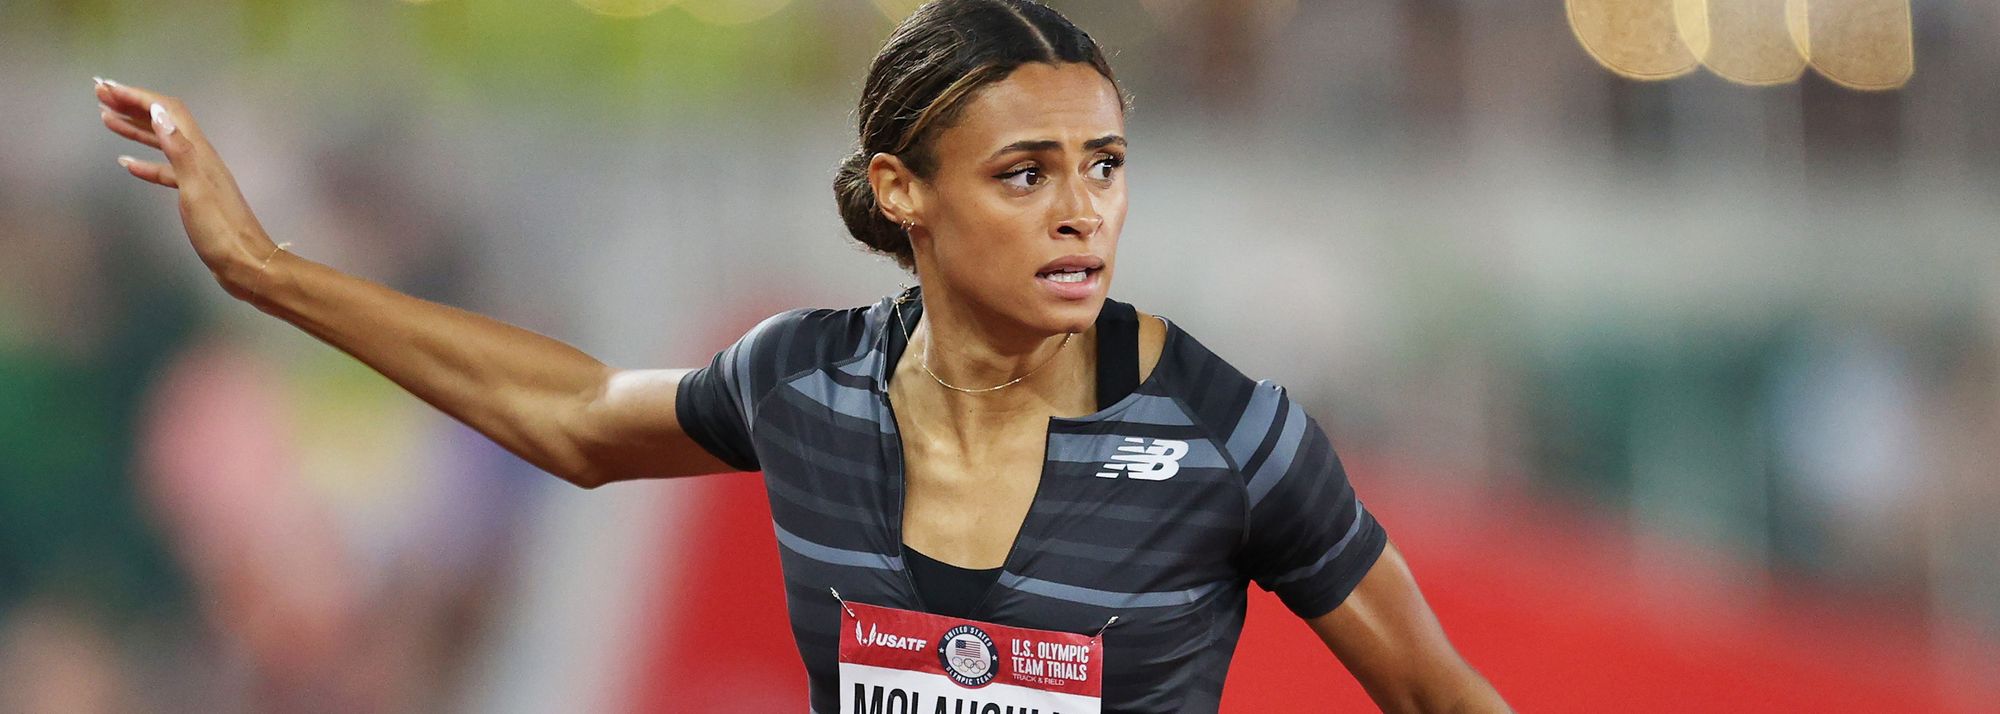 McLaughlin smashes world 400m hurdles record in Eugene with 51.90 ...